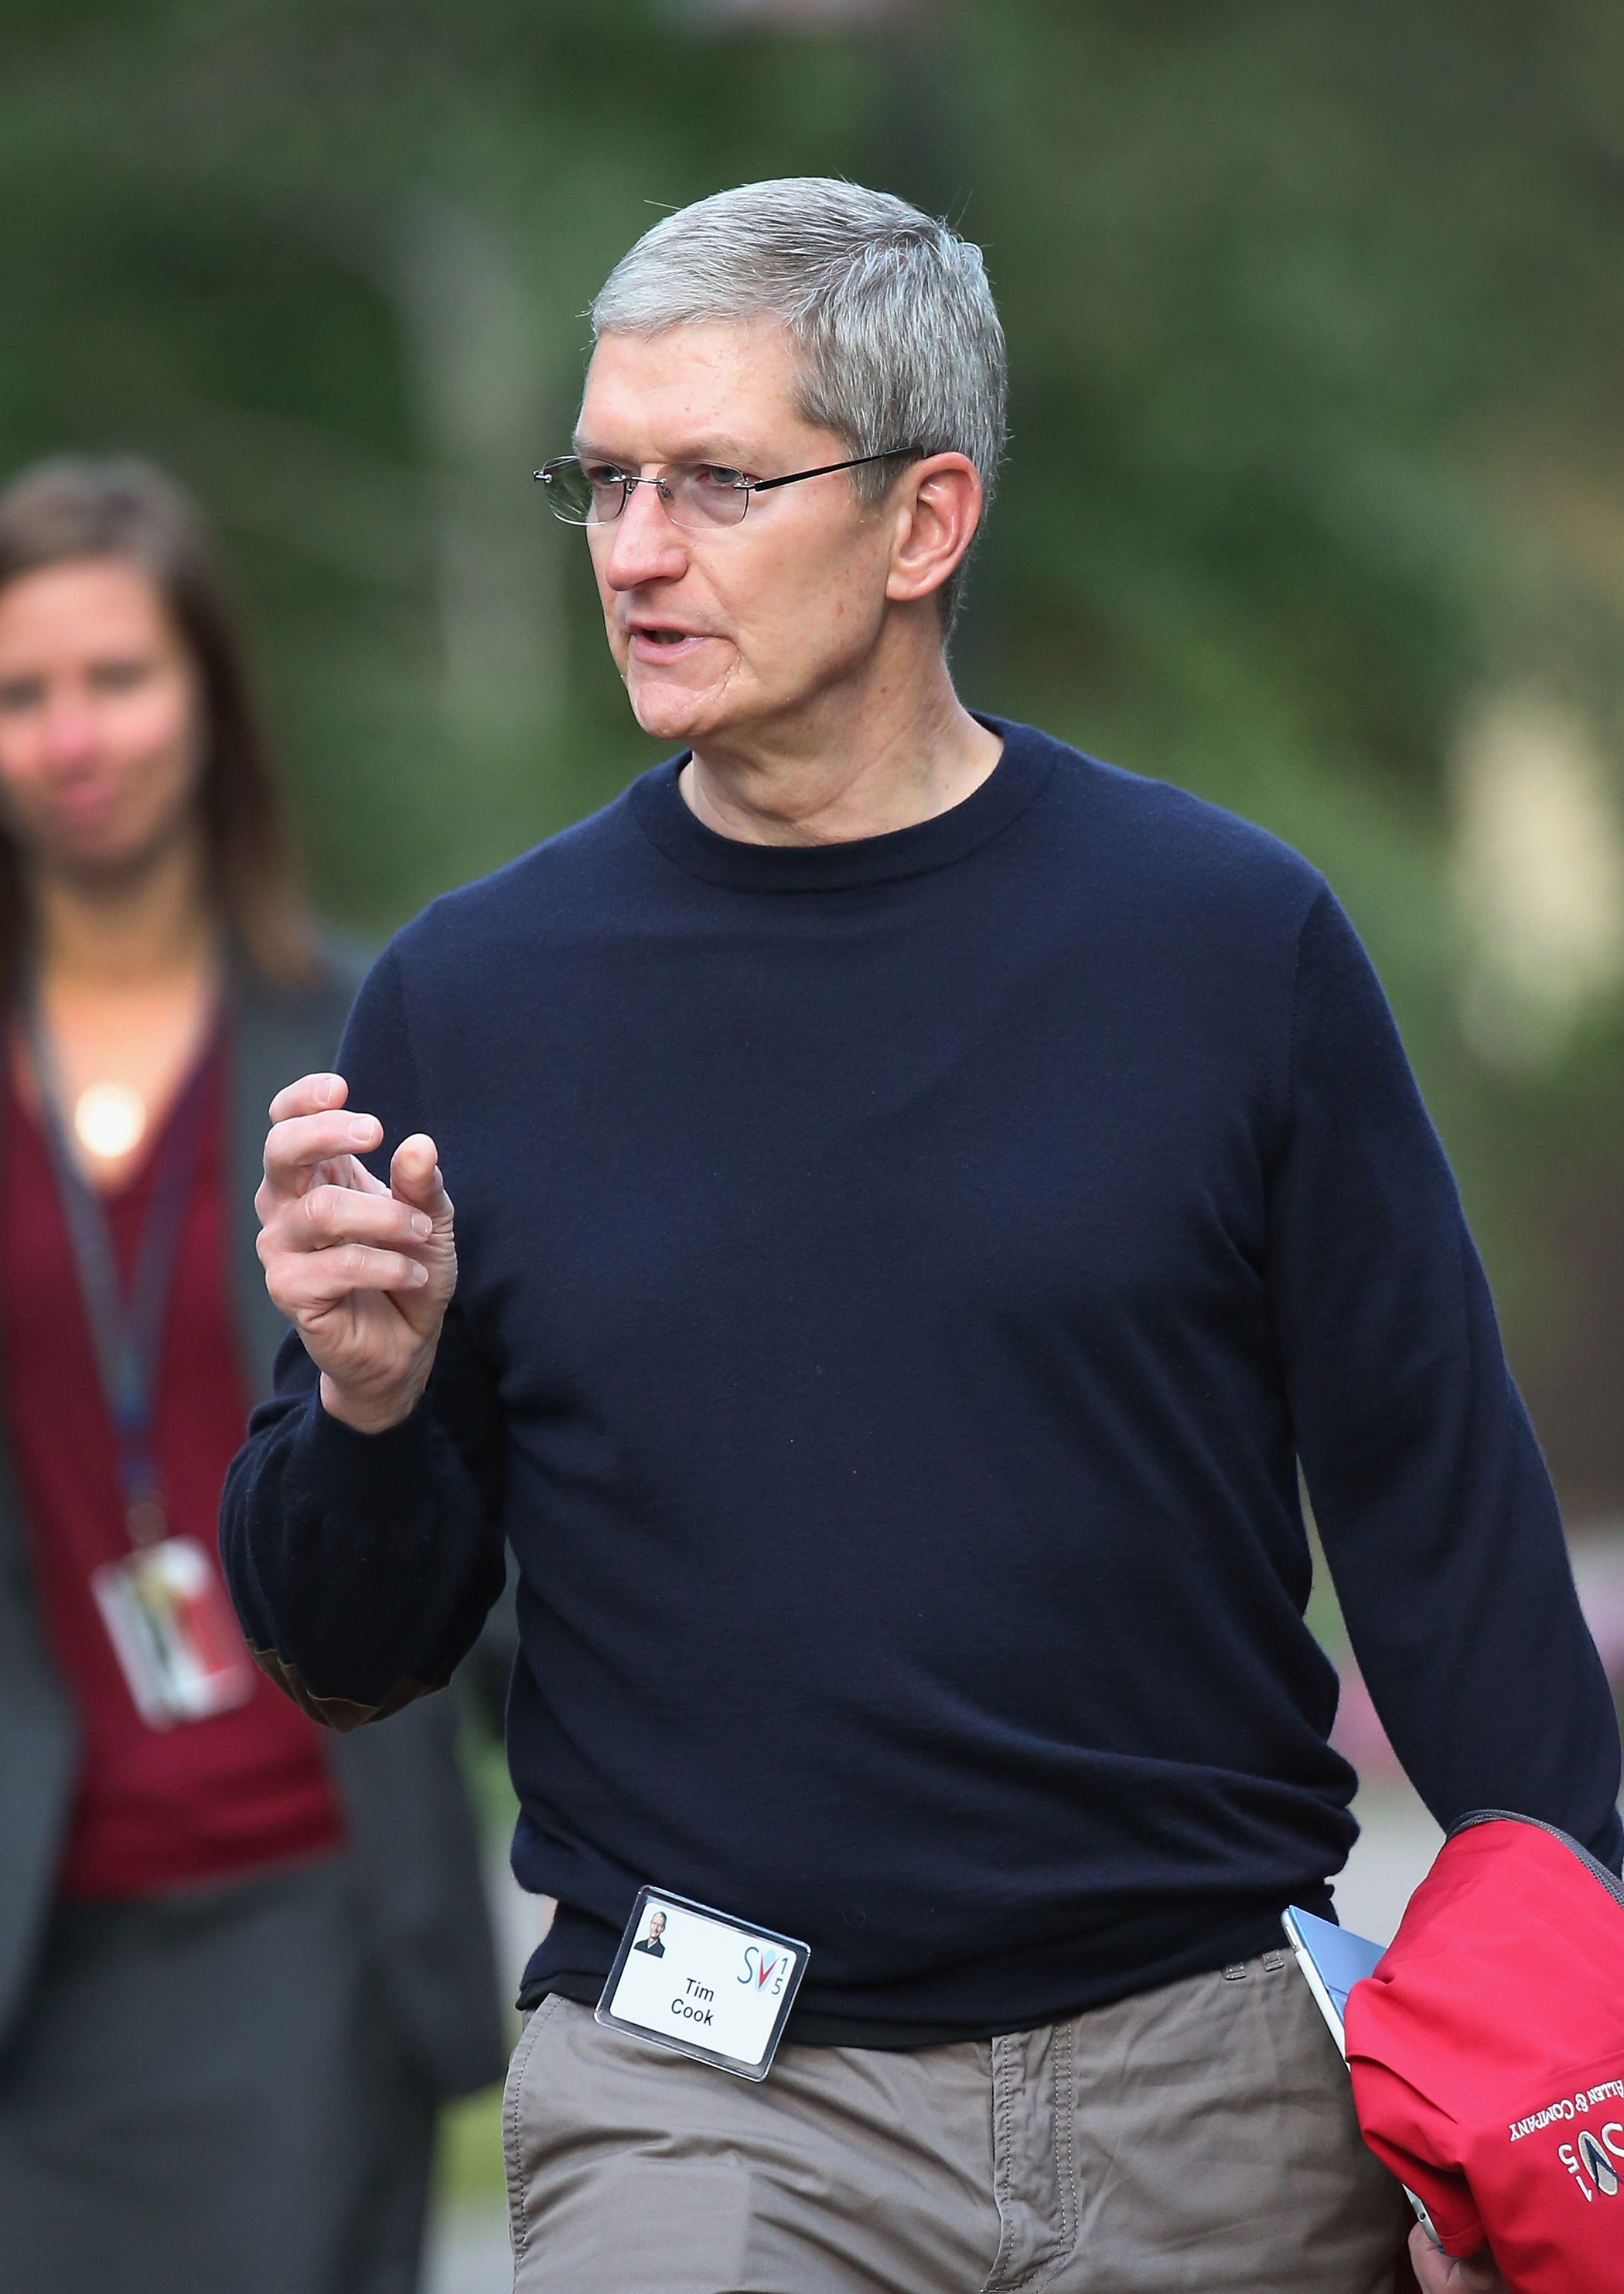 Tim Cook on July 9, 2015 in Sun Valley, Idaho. (Scott Olson—Getty Images)